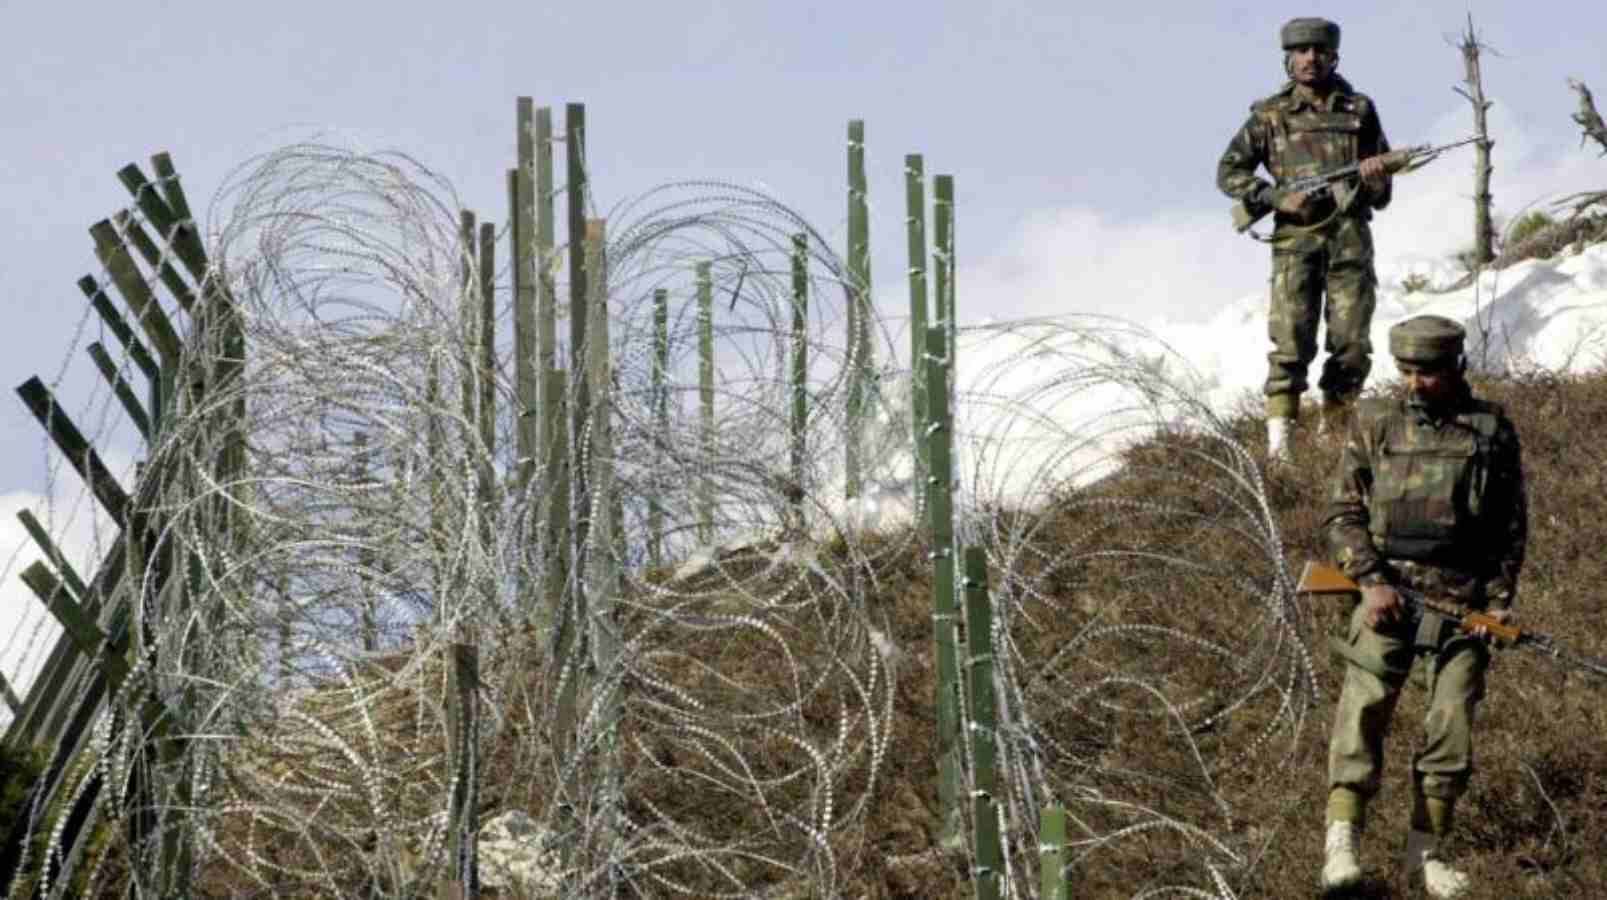 Ceasefire Violation: PAK violated ceasefire, fired bullets at BSF jawans, got a strong response